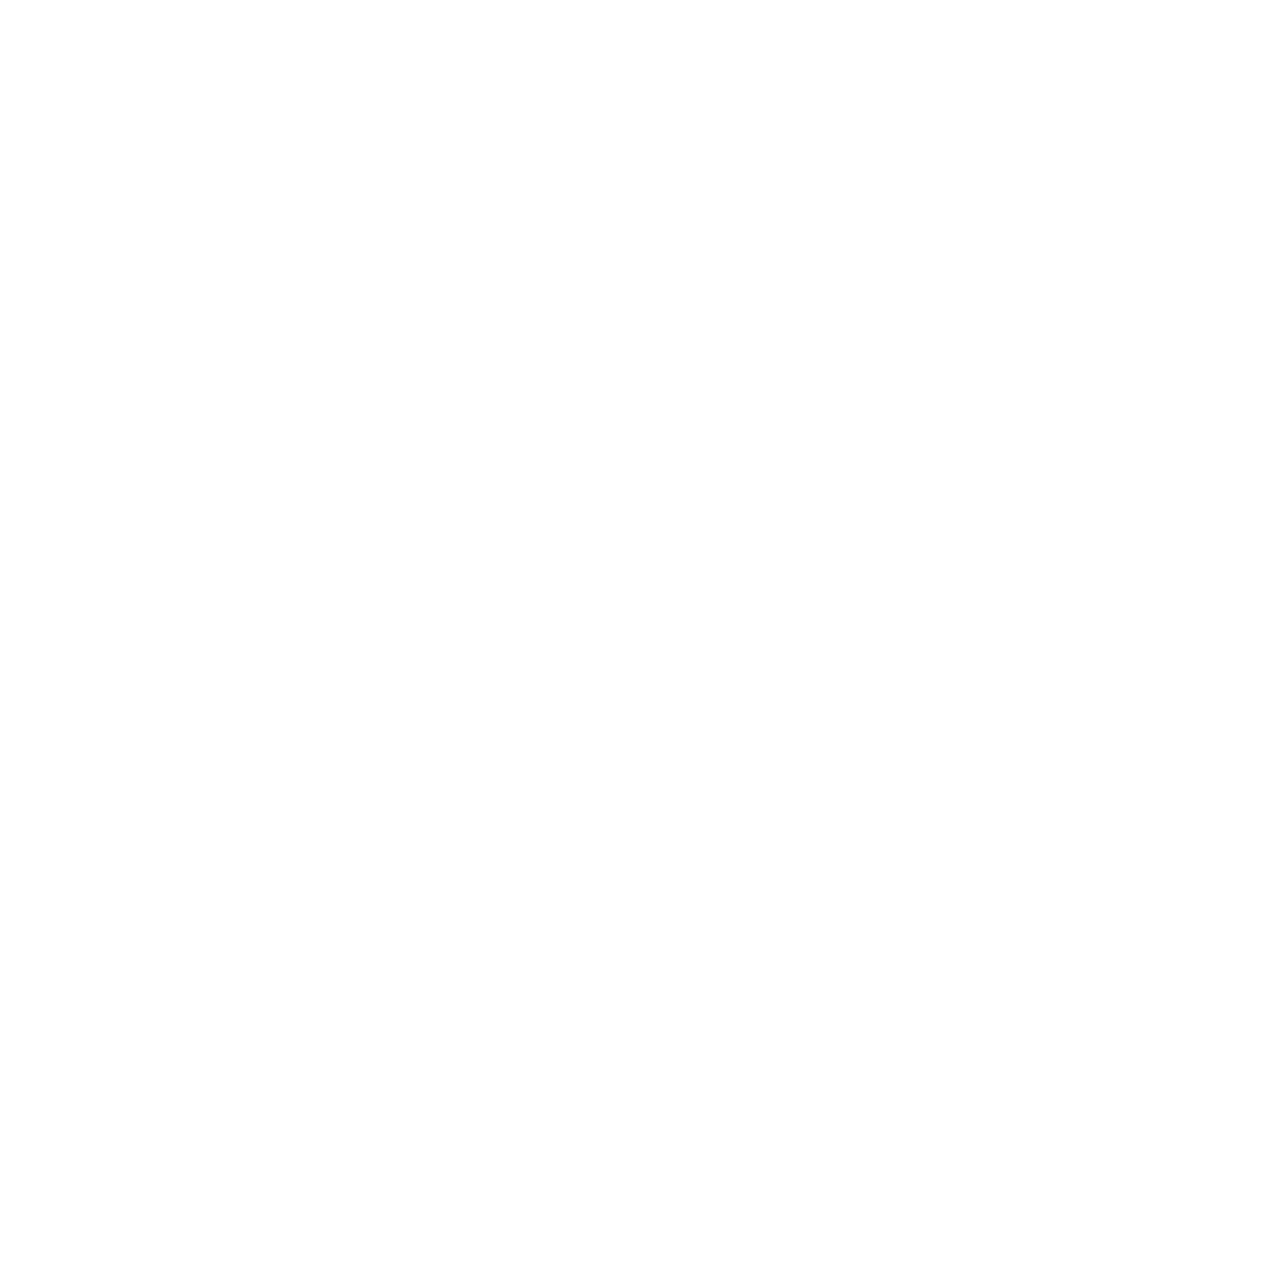 A black circle. Inside is the Mona Minkara logo in white. It is Two M’s with one super imposed onto another. 